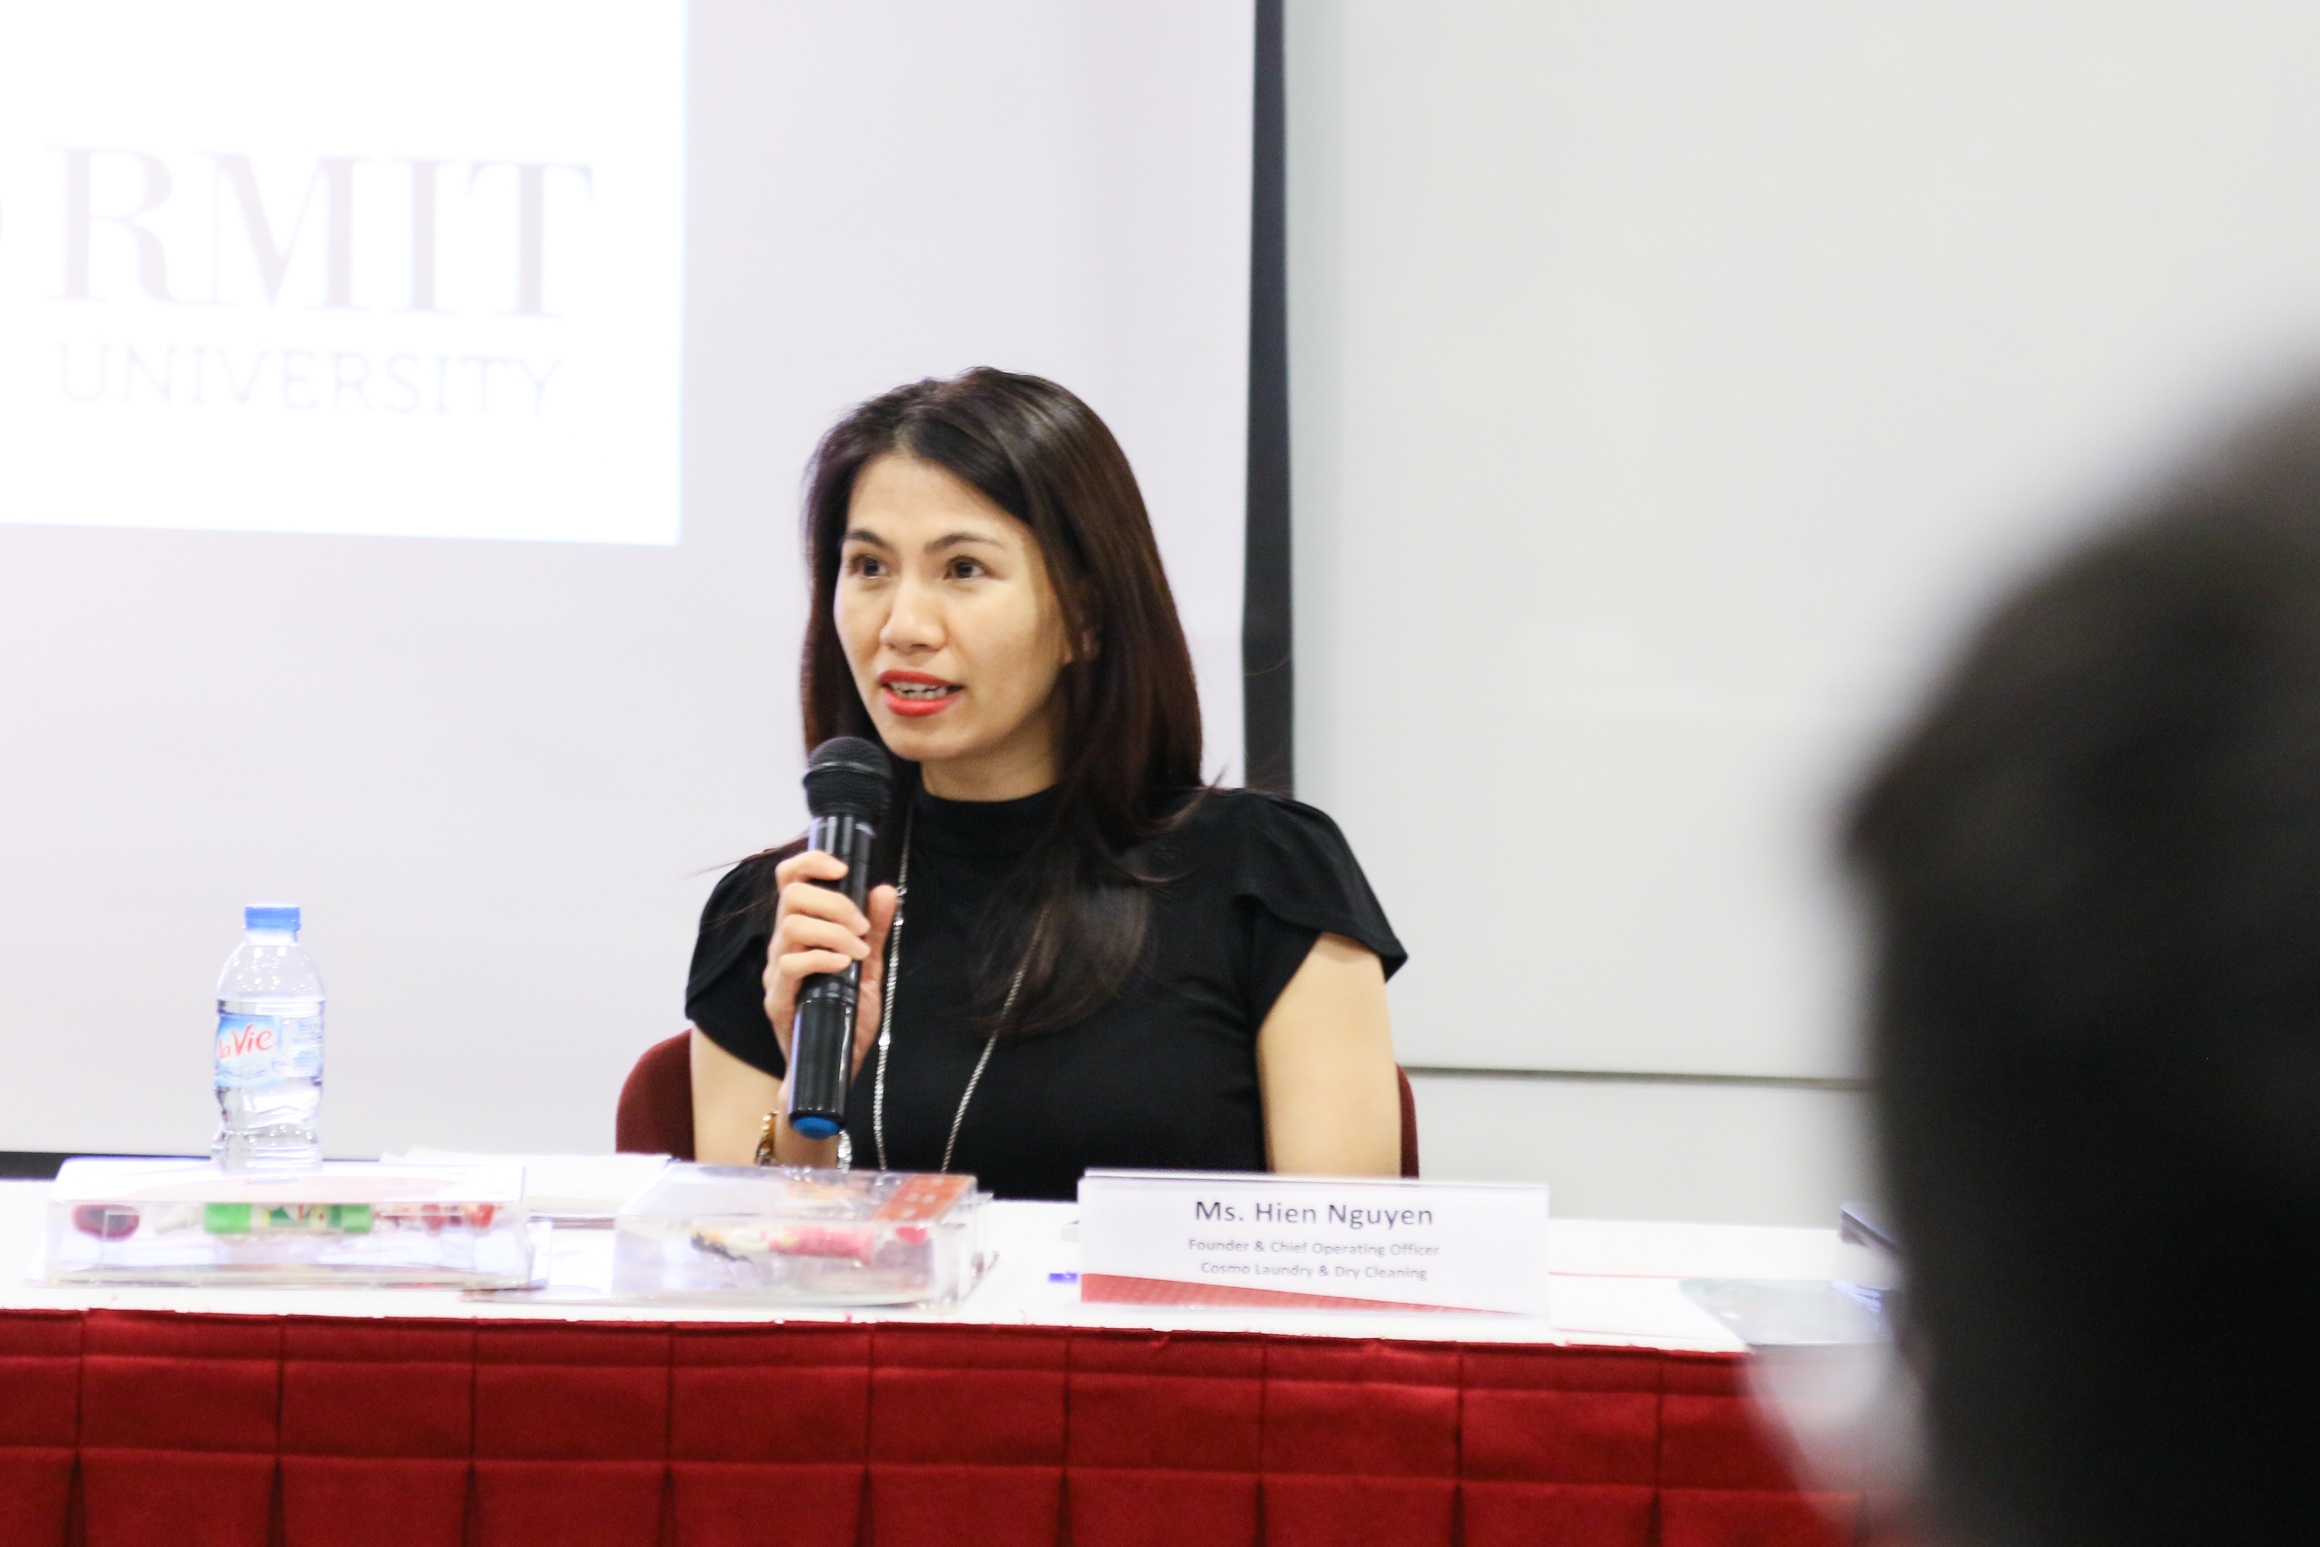 Hien Nguyen, a graduate of RMIT Vietnam’s MBA program and CEO of Cosmo Laundry & Dry Cleaning.